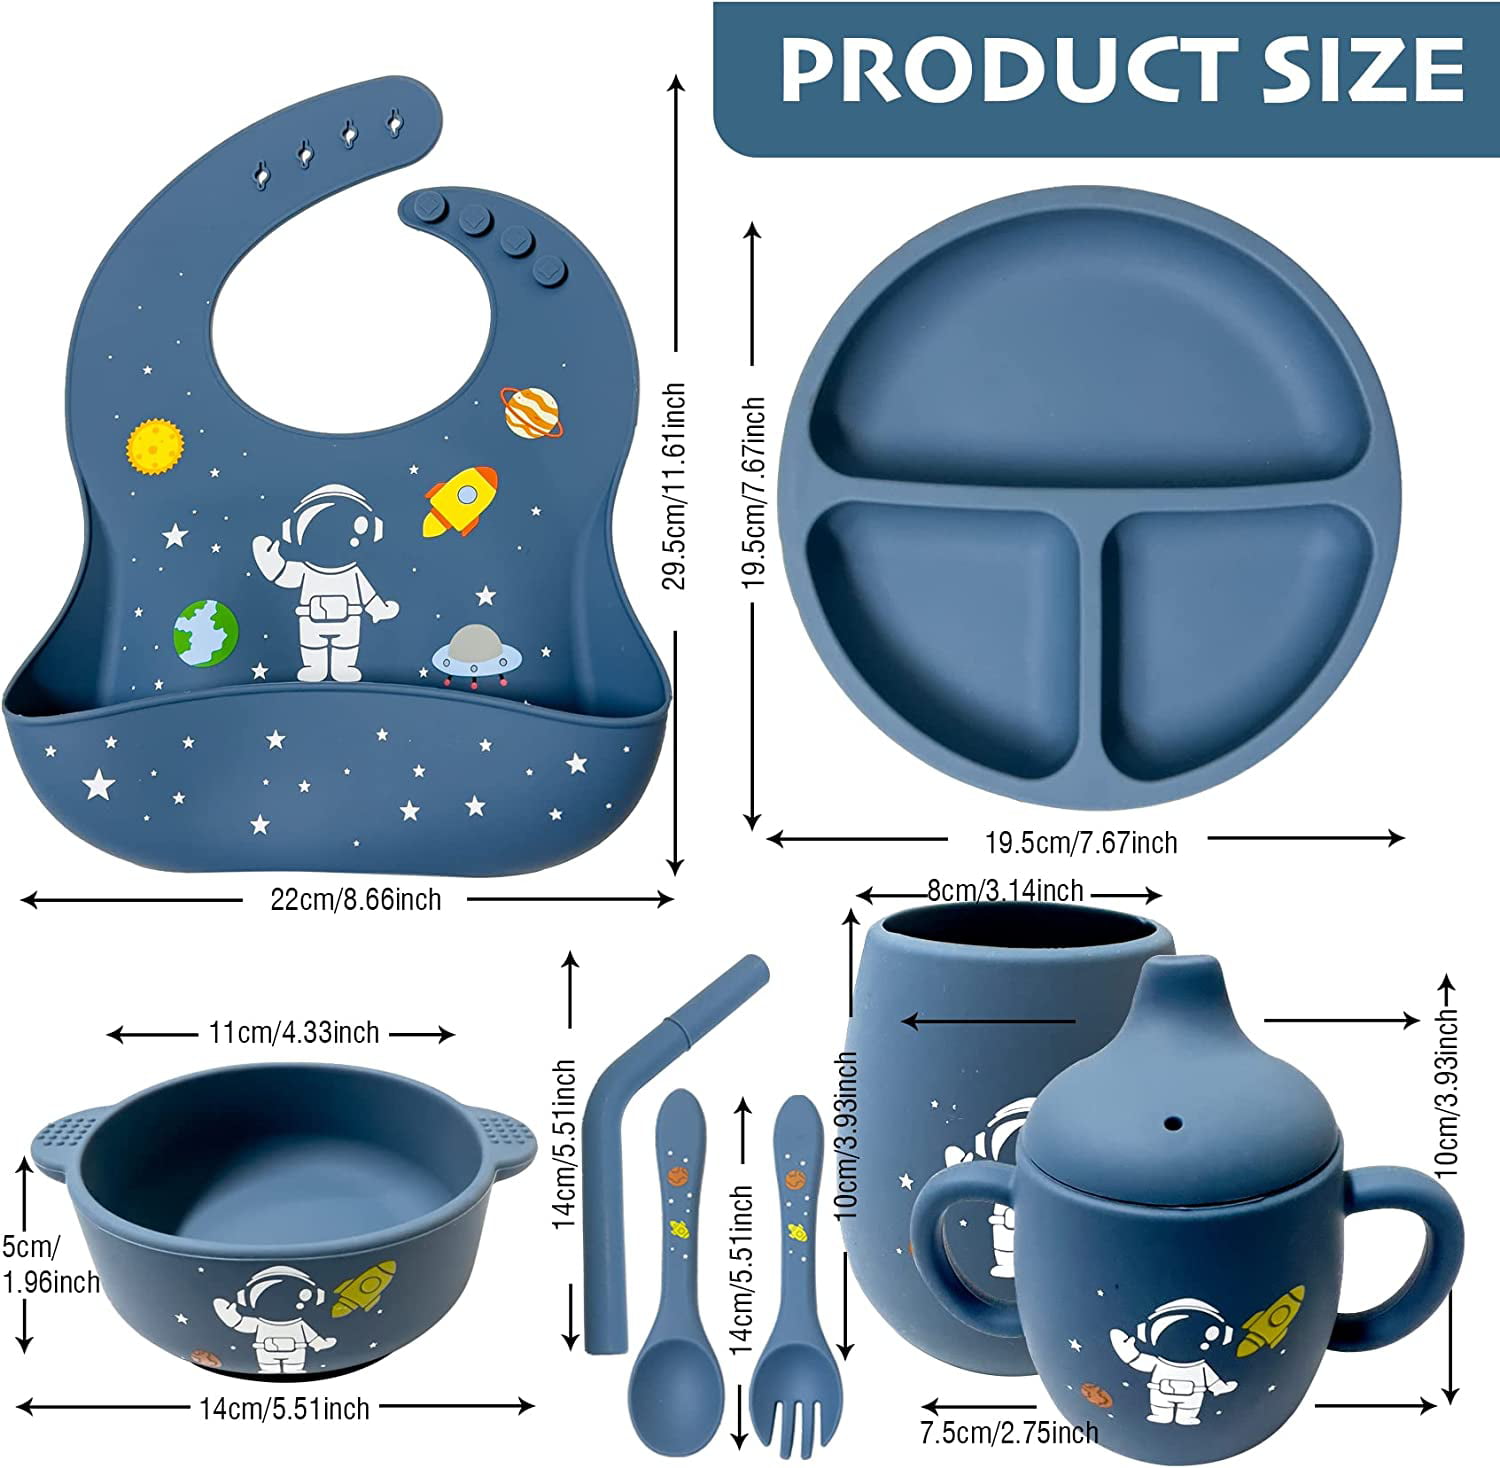 Ayaoqiang Soft Silicone Baby Feeding Set, Baby LED Weaning Supplies with Adjustable Bib, Suction Bowl, Suction Divided Plate, Straw Cup, First Stage Spoon 